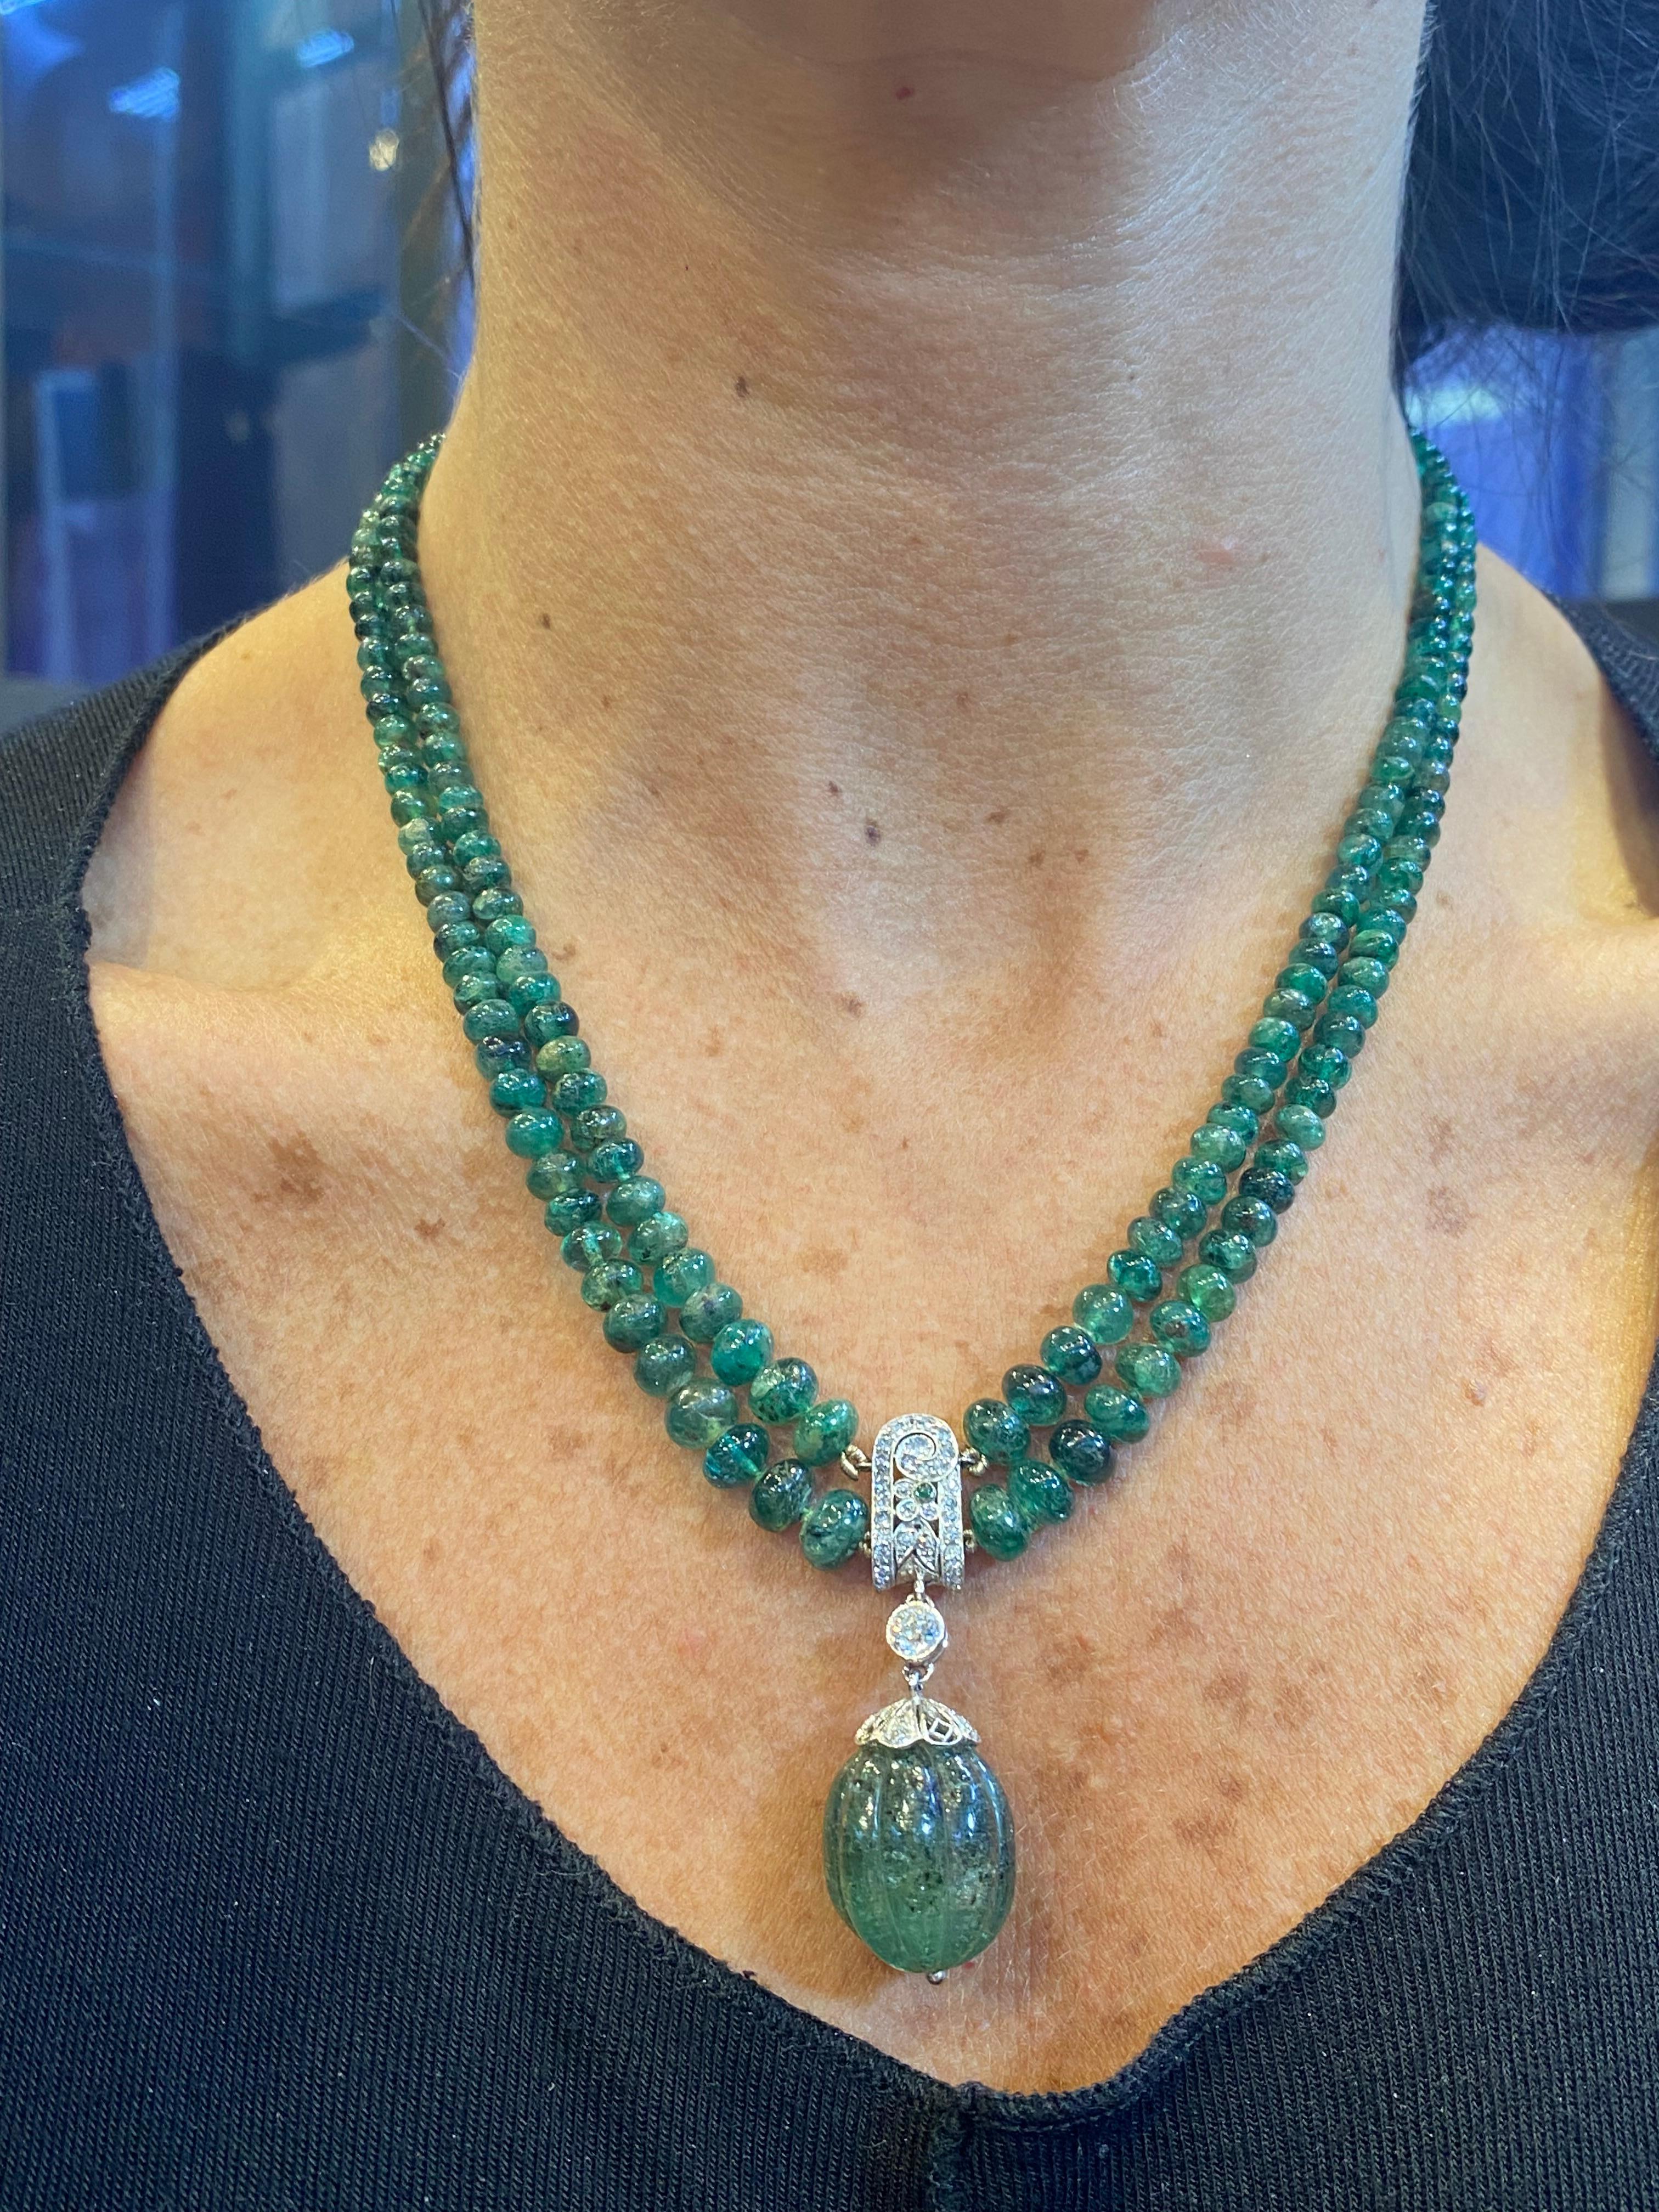 Multi Strand Emerald Bead Necklace

A necklace made of 2 strands of emerald beads suspending a pendant. The clasp and pendant consist of round cut diamonds set in platinum and 14 karat white gold.

The pendant is set with a carved emerald drop and